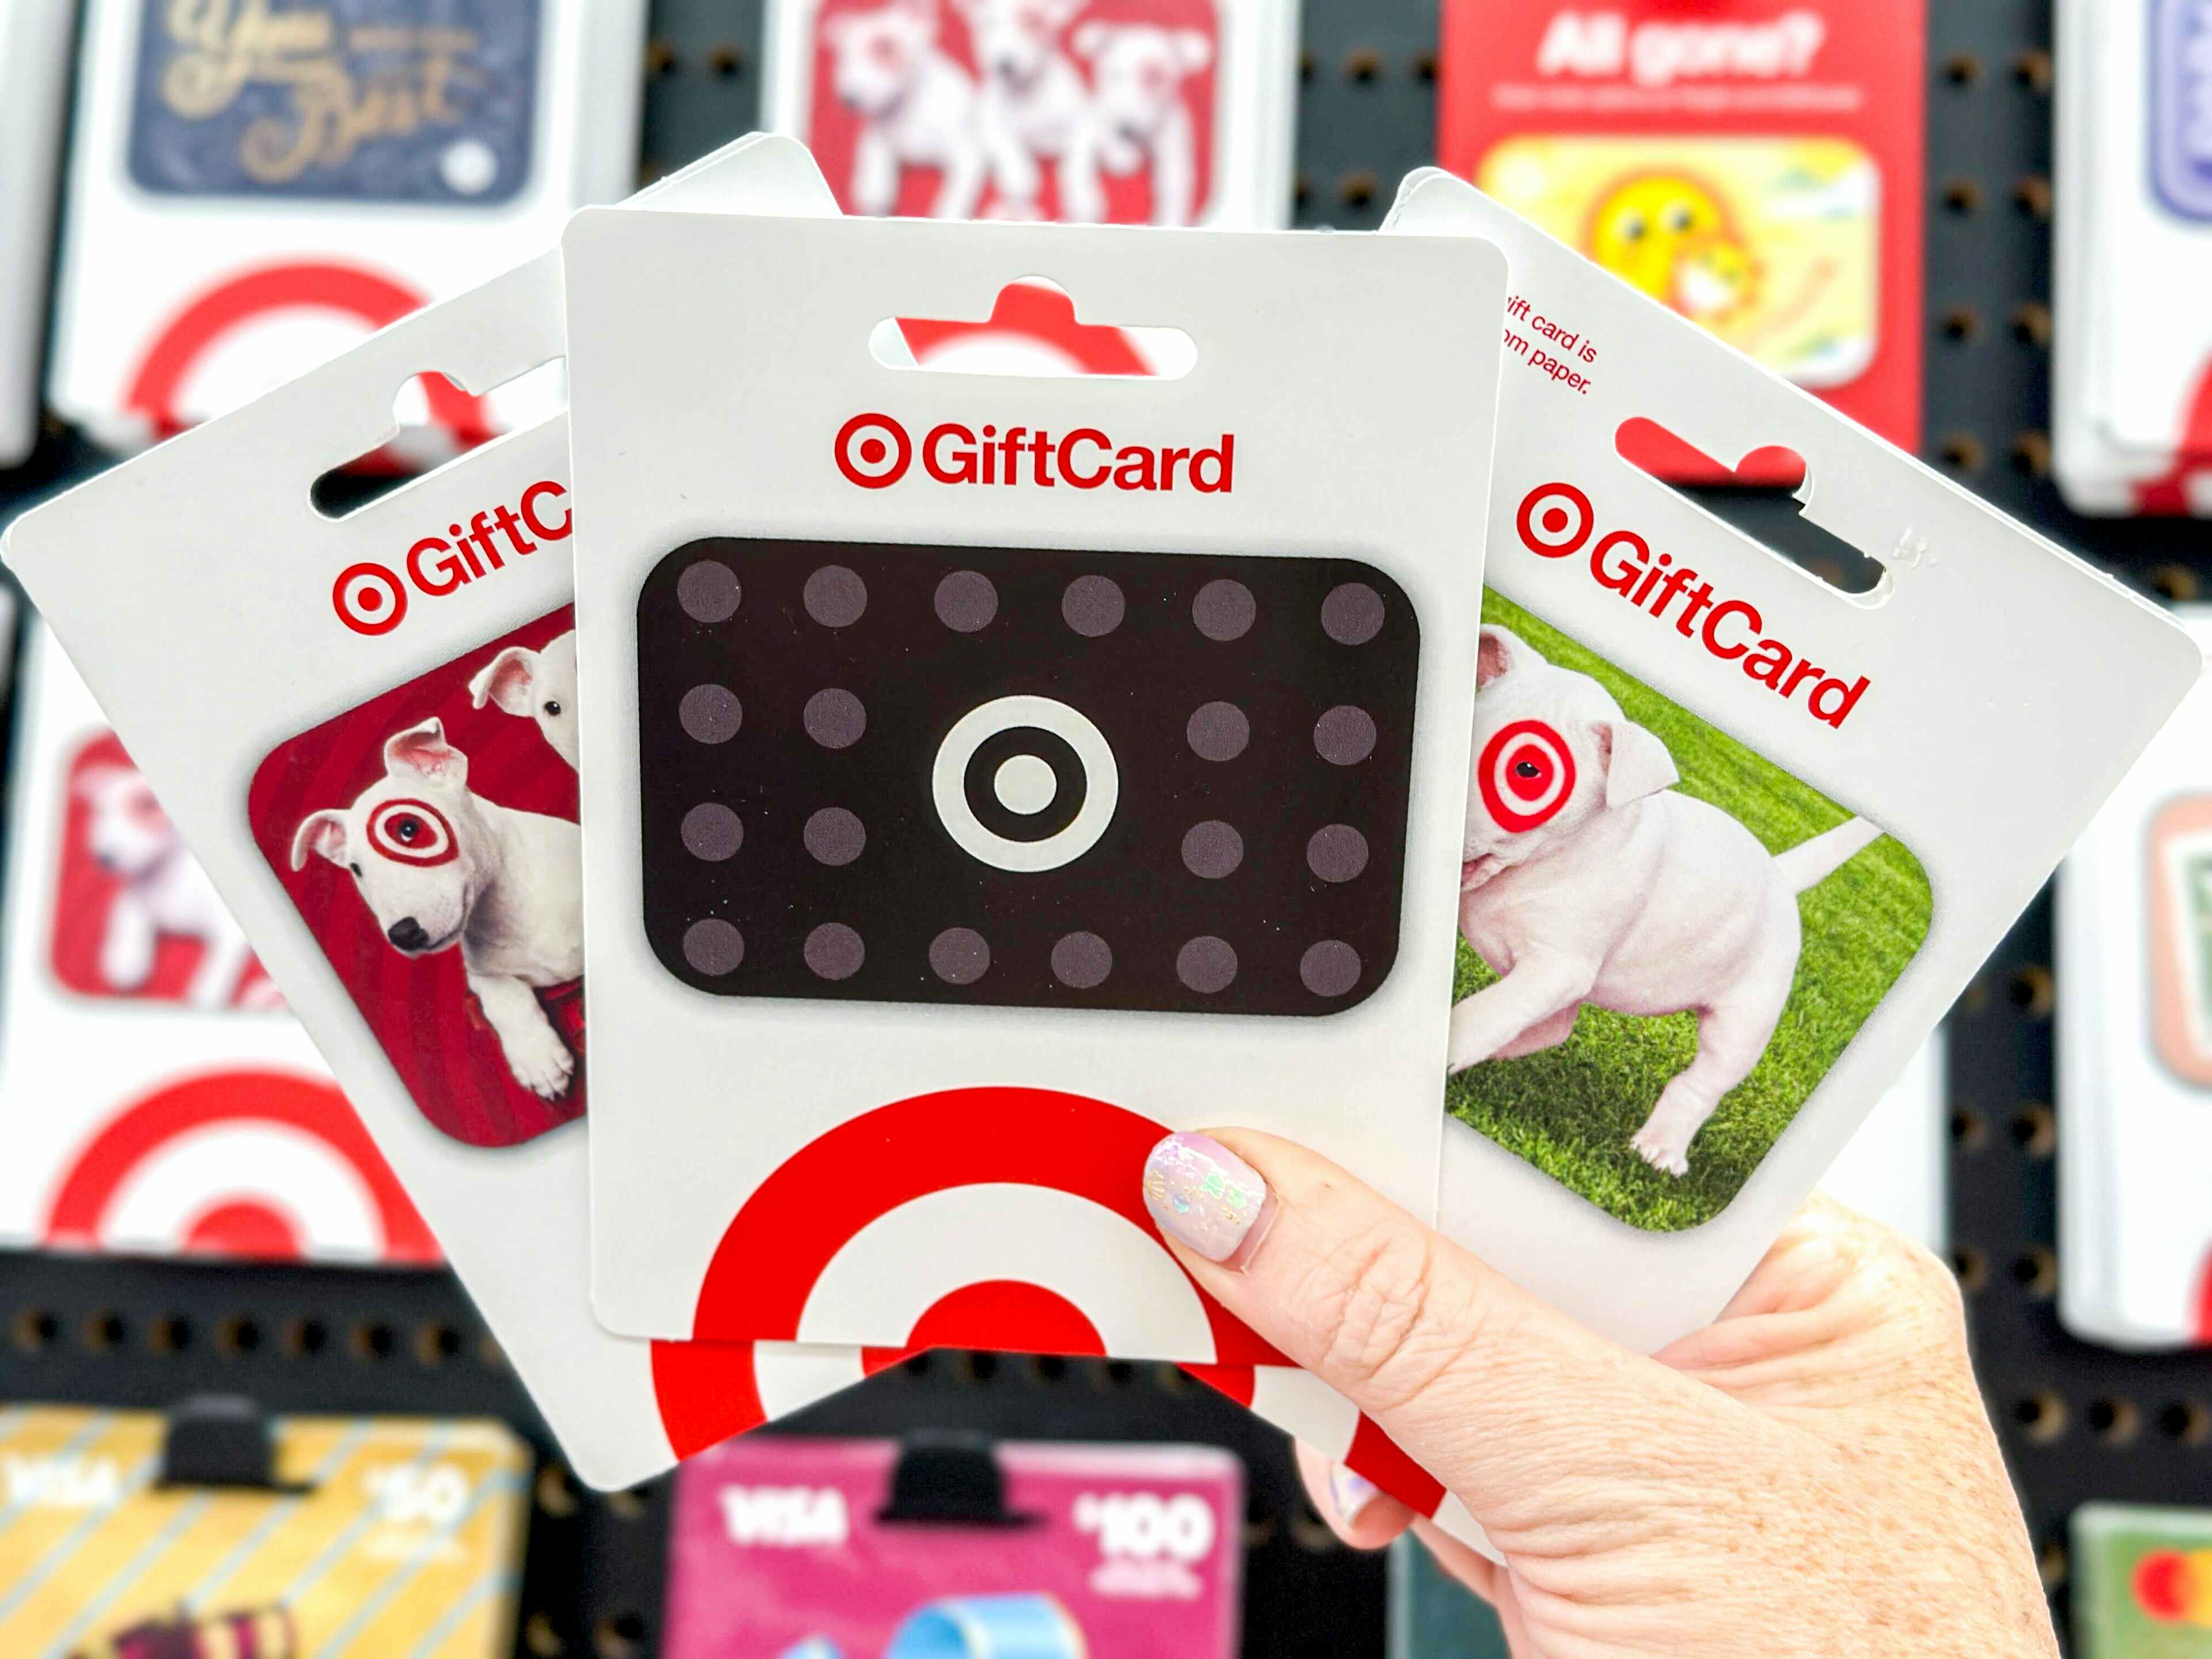 target-bounty-gift-cards-hand-kcl-1